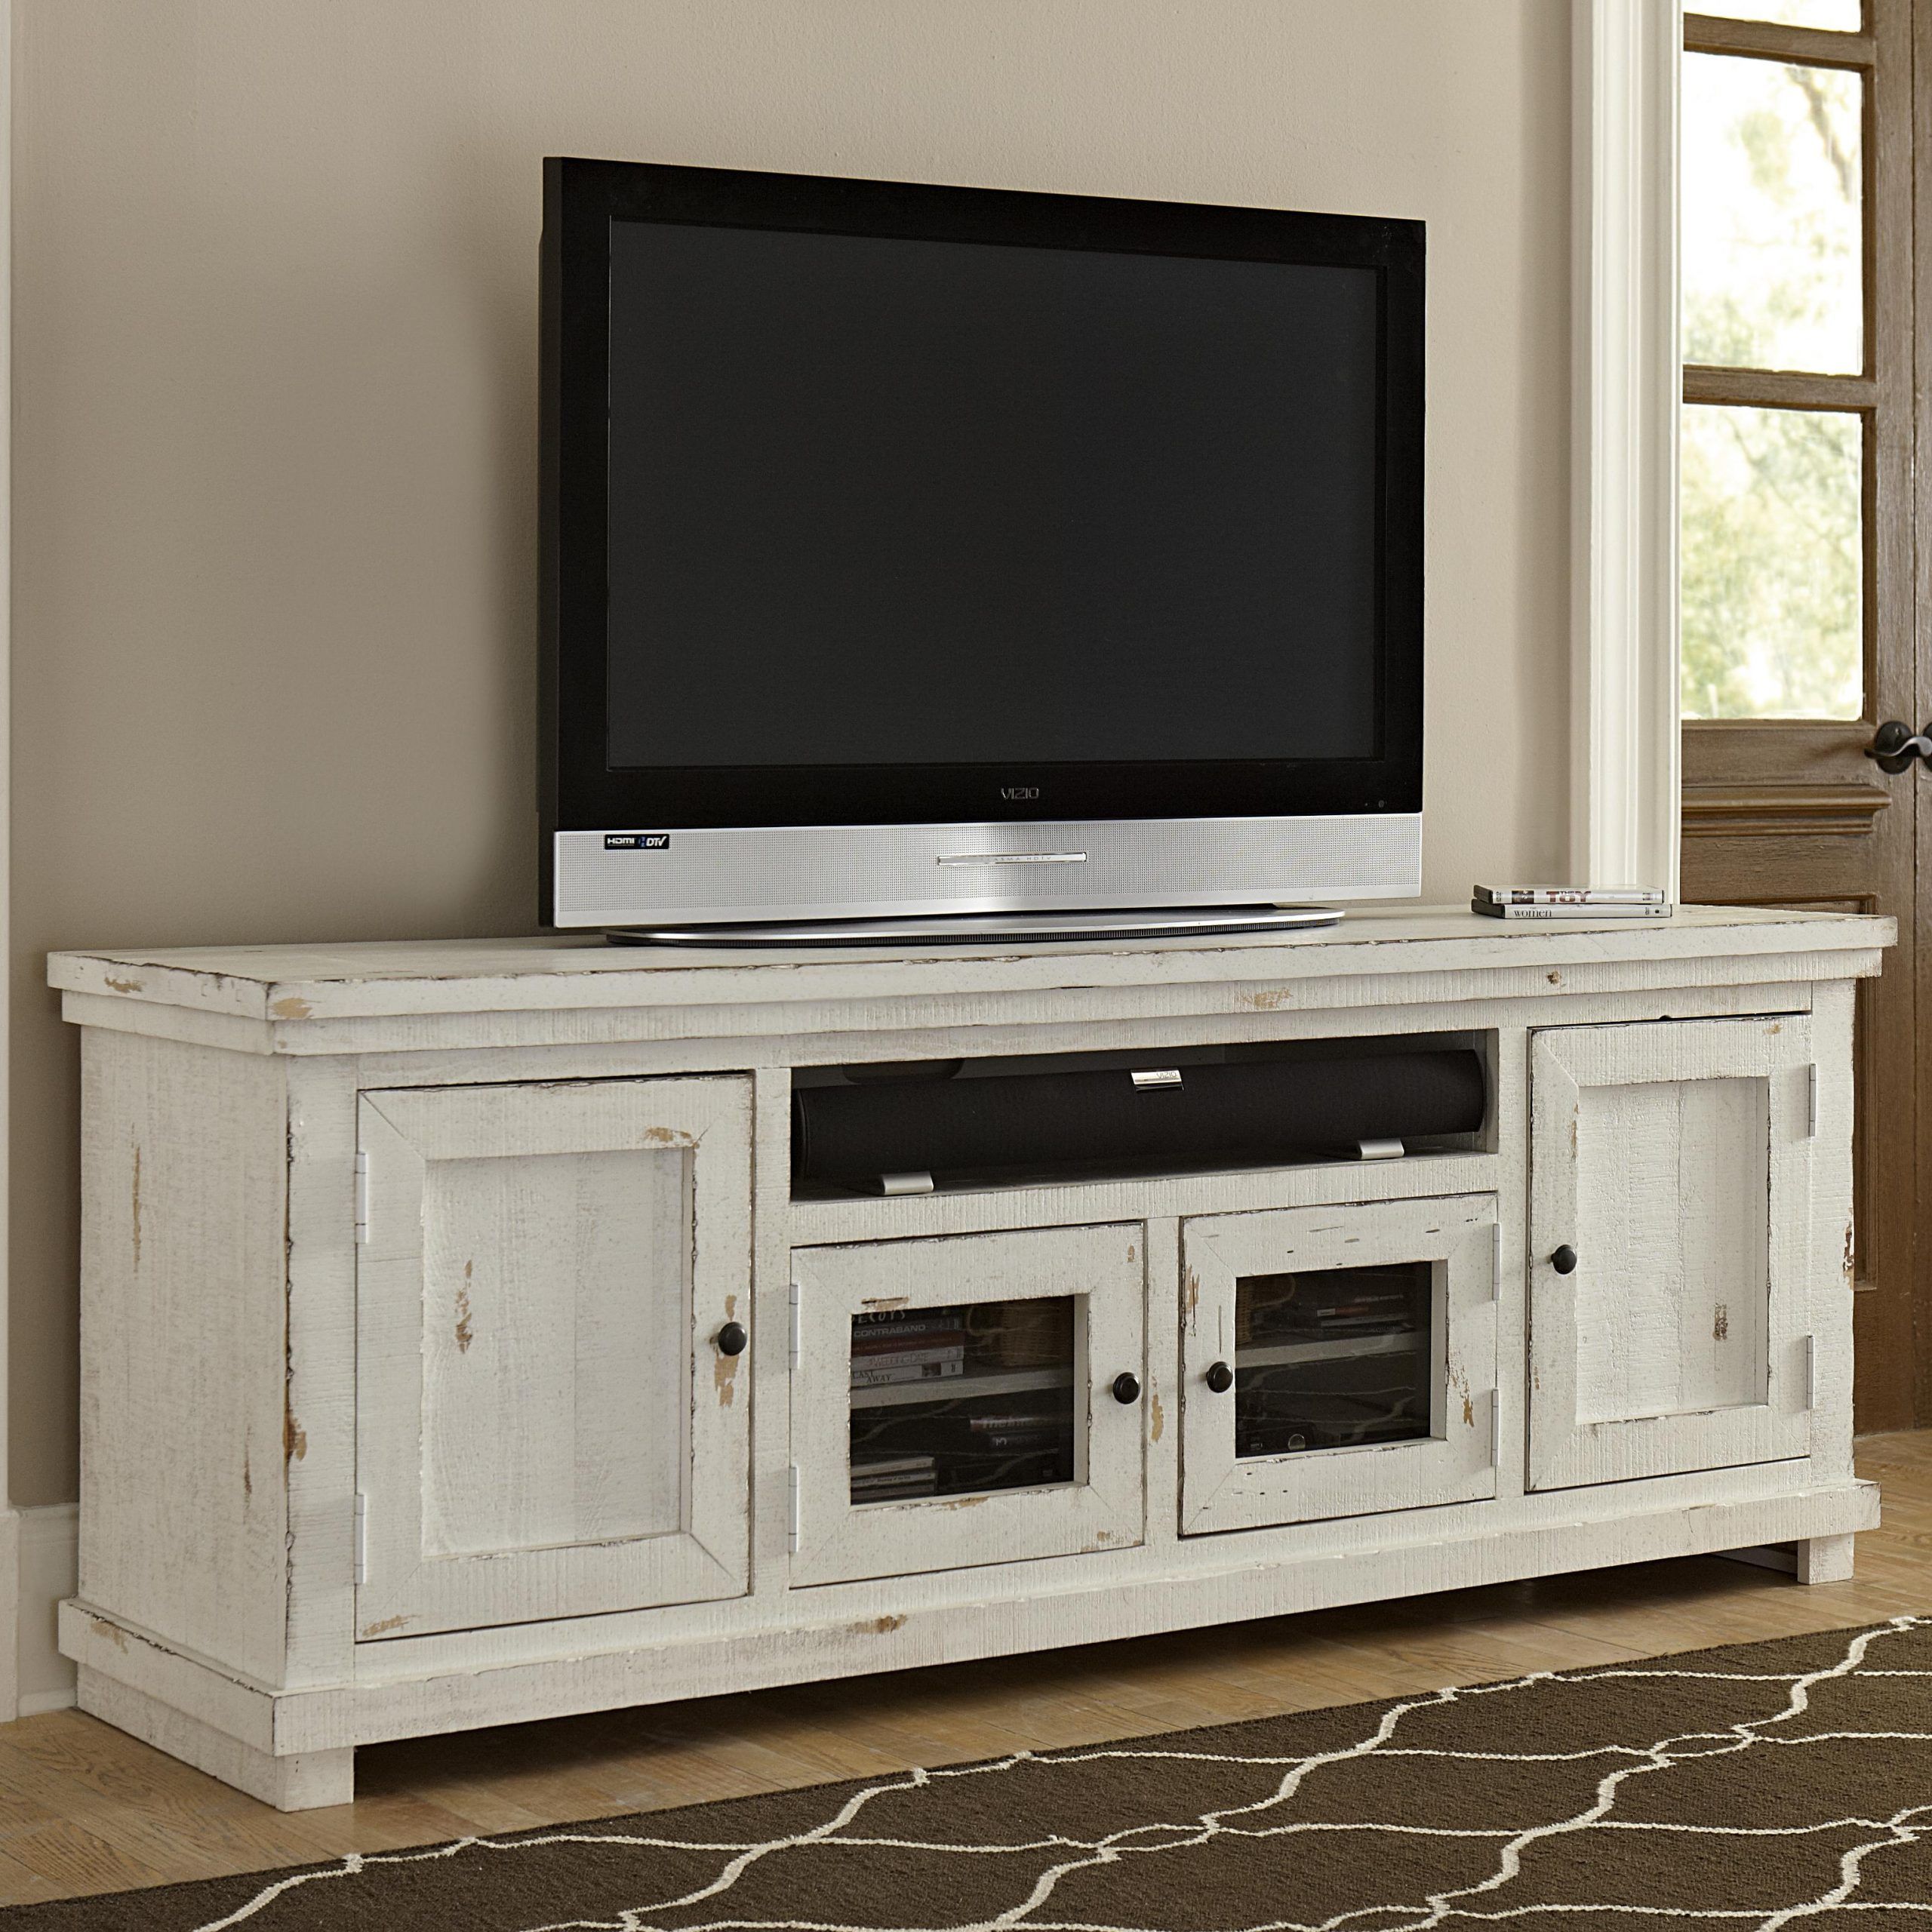 Progressive Furniture Willow Large 74" Distressed Pine With Tv Media Furniture (View 7 of 15)